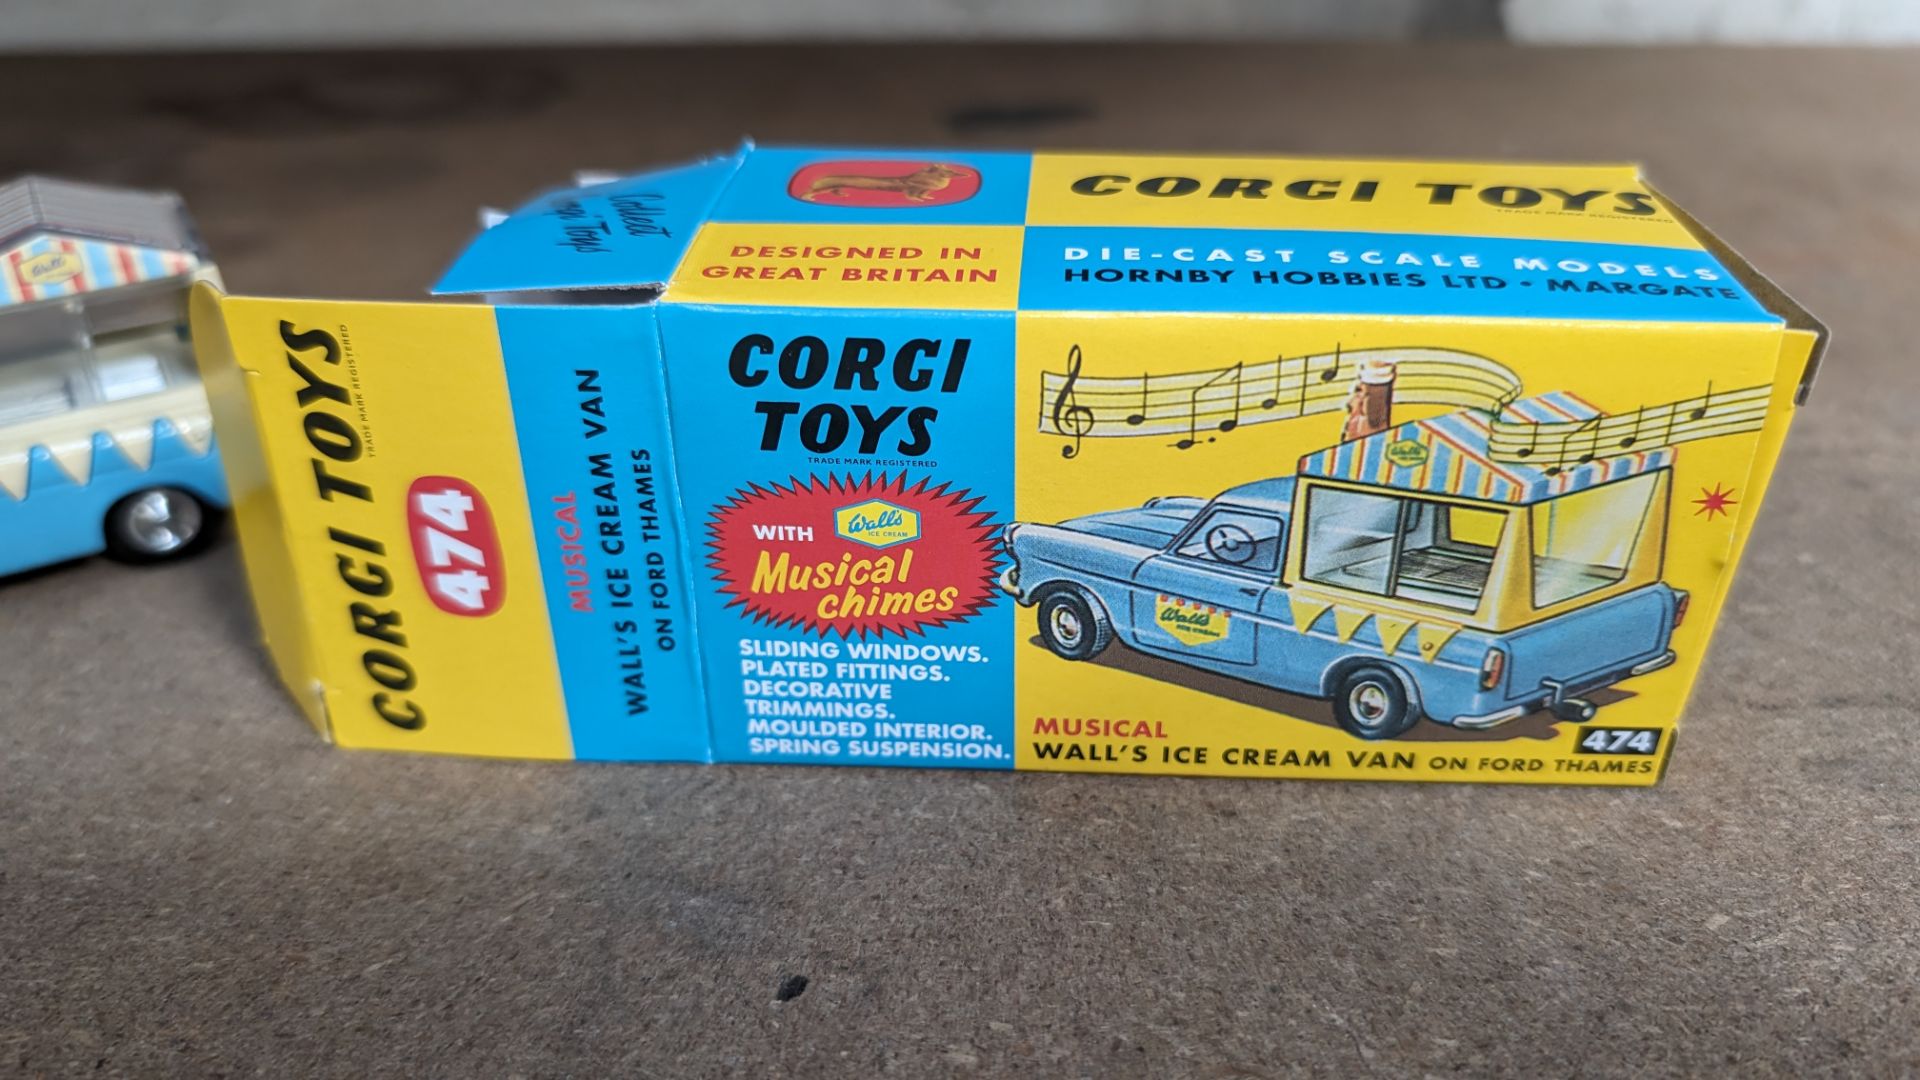 Corgi Toys musical Wall's ice cream van on Ford Thames 474 with musical chimes - Image 9 of 11